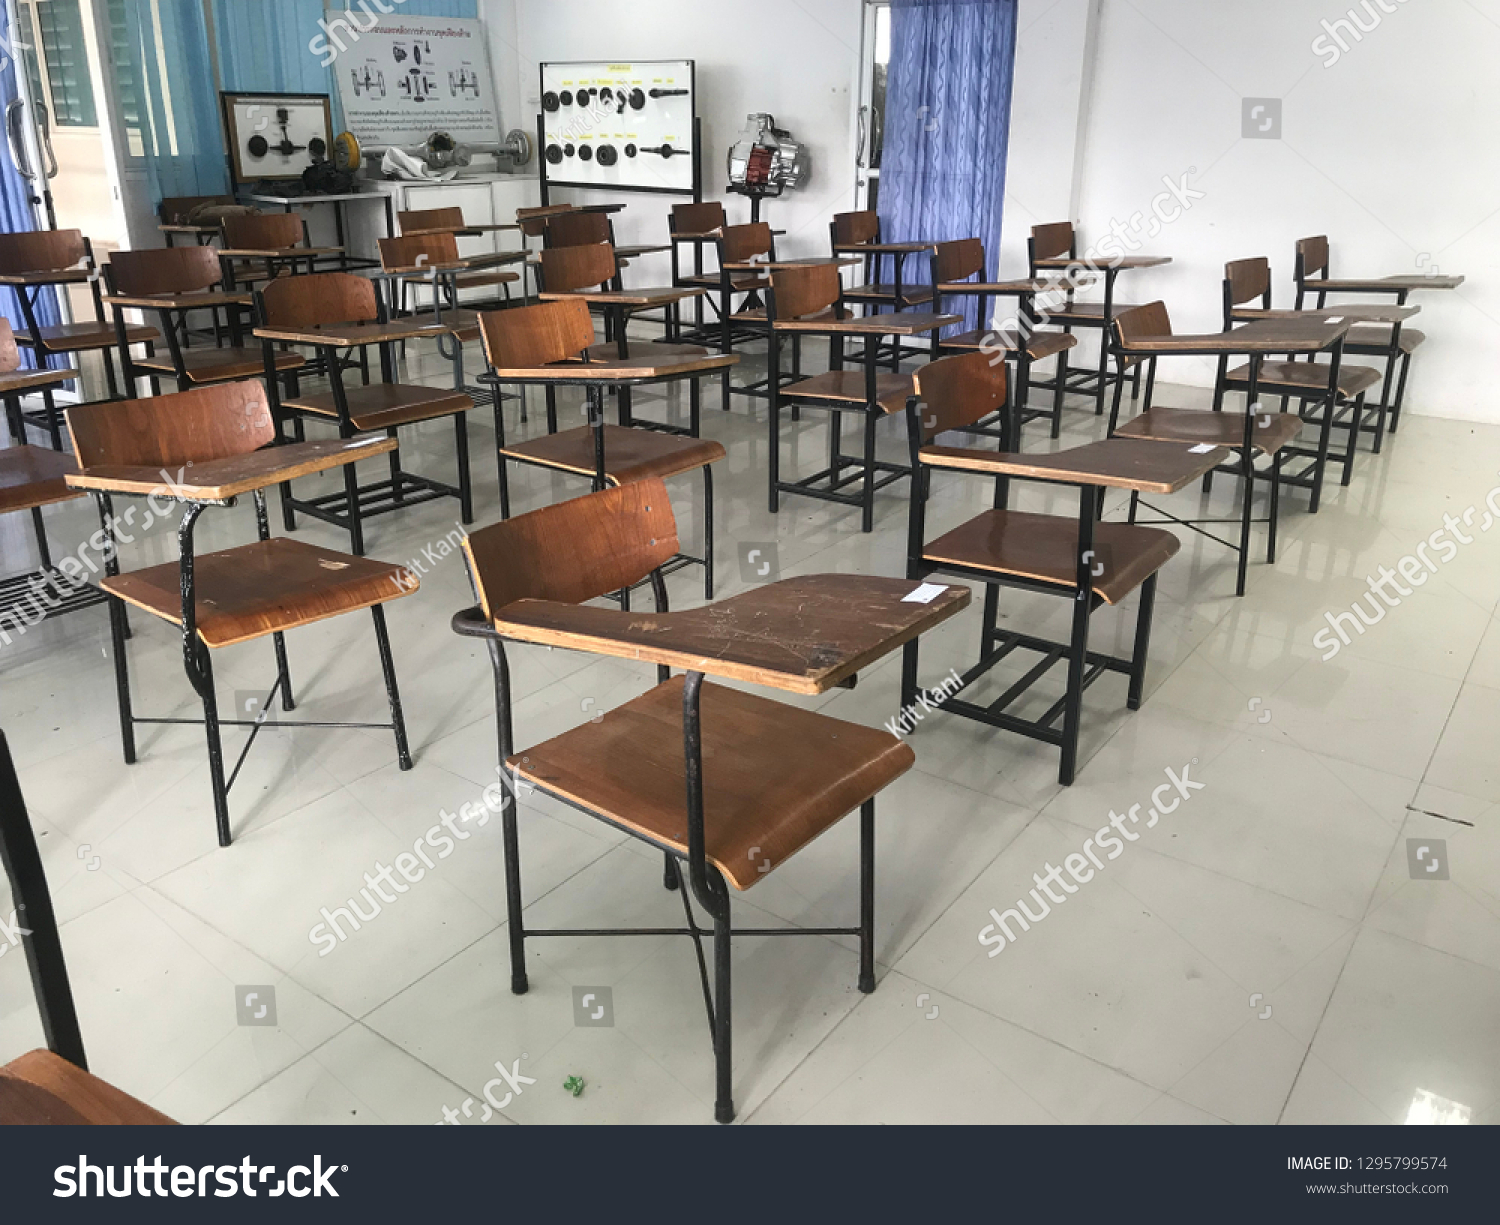 Lecture Room Chairs Desks Stock Photo Edit Now 1295799574